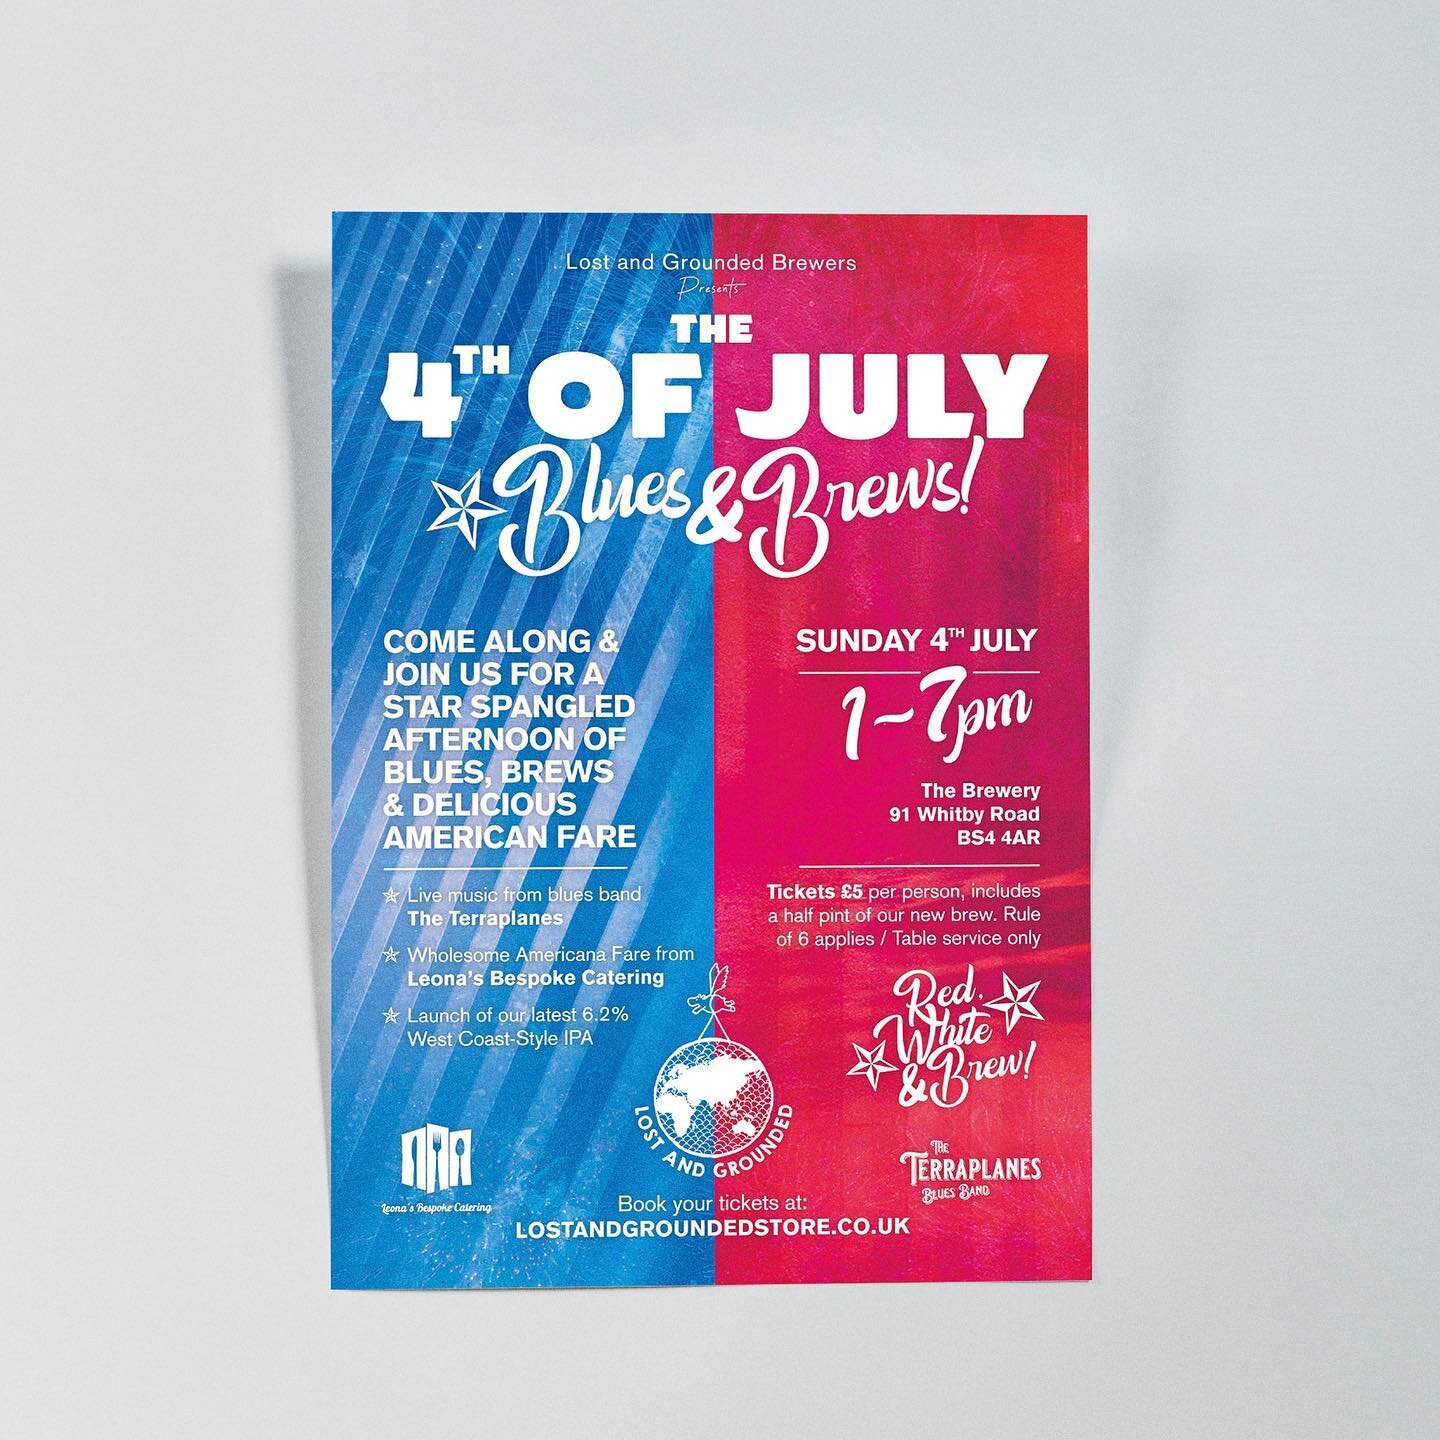 4th July blues &amp; brews! Big event this Saturday at the brewery 🎆. Poster design for @lostandgroundedbrewers 
-
-
-
-
-
#akoradesign #graphicdesign #graphics #artdirection #poster #creative #create #design #bluesmusic #4thofjuly #4thjuly #graphic